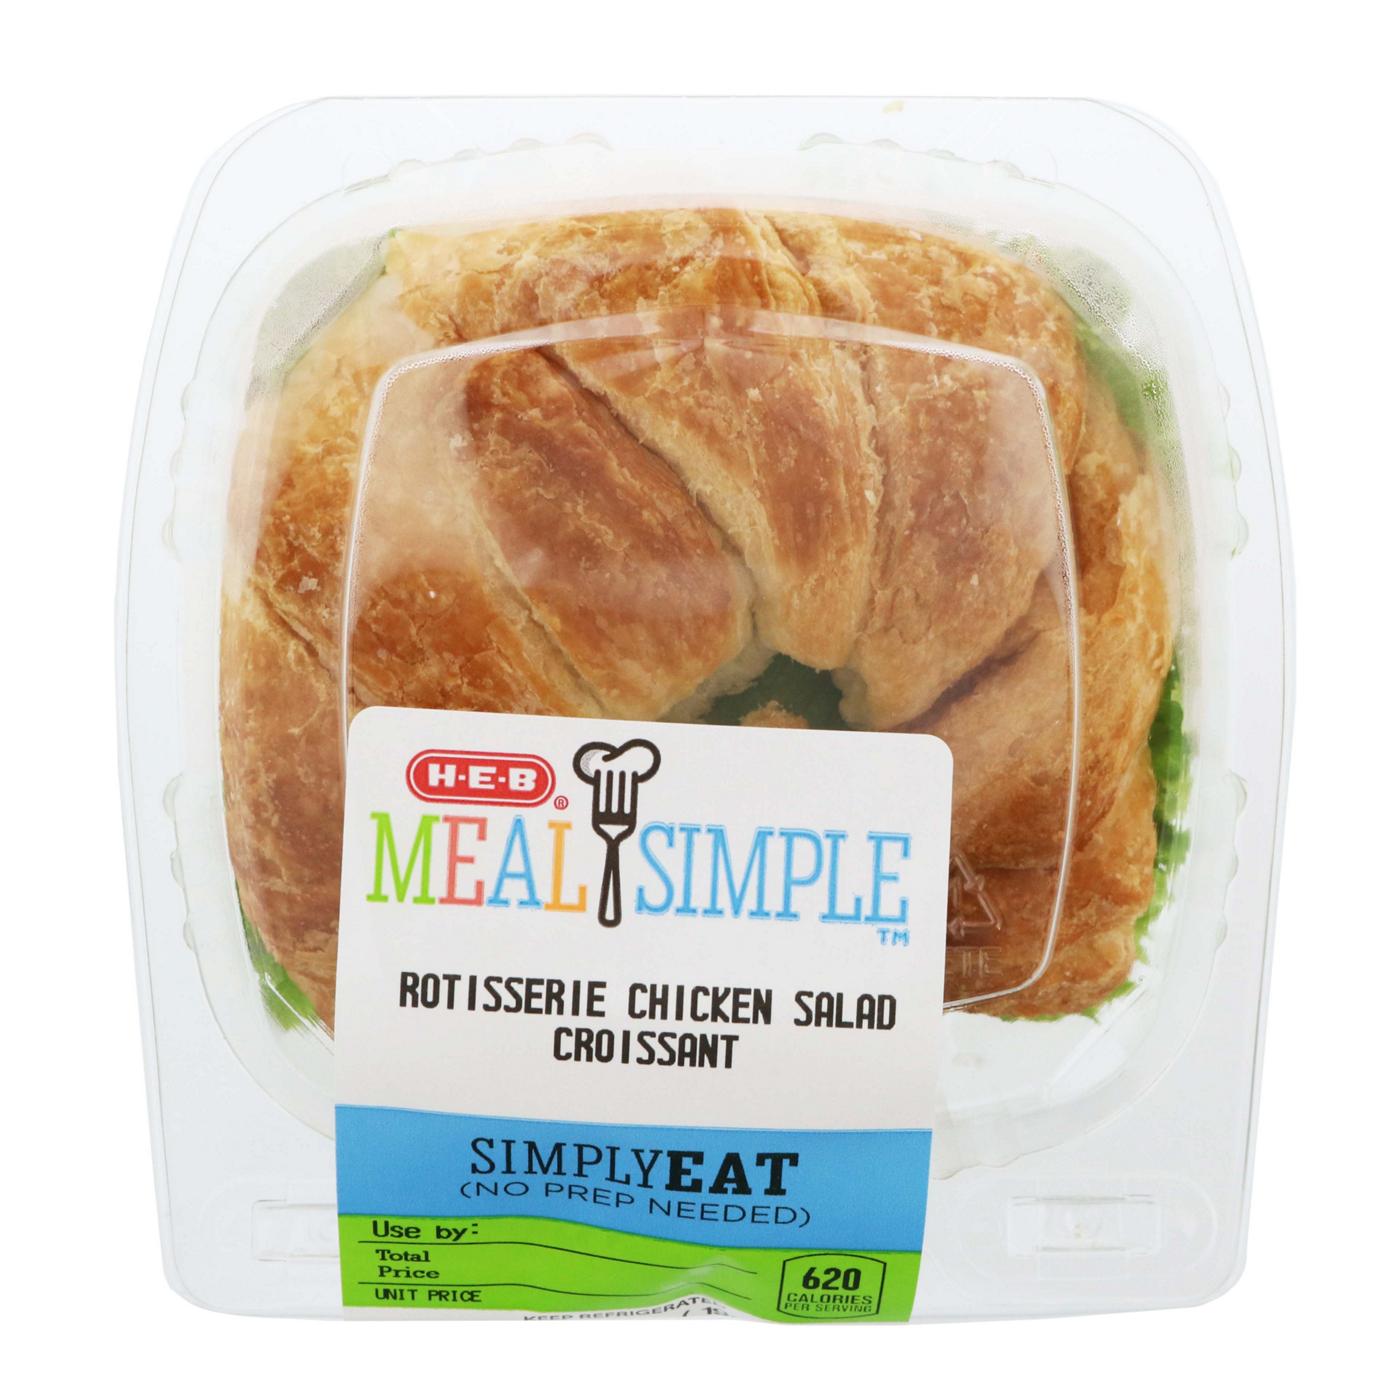 Meal Simple by H-E-B Rotisserie Chicken Salad Croissant Sandwich; image 3 of 3